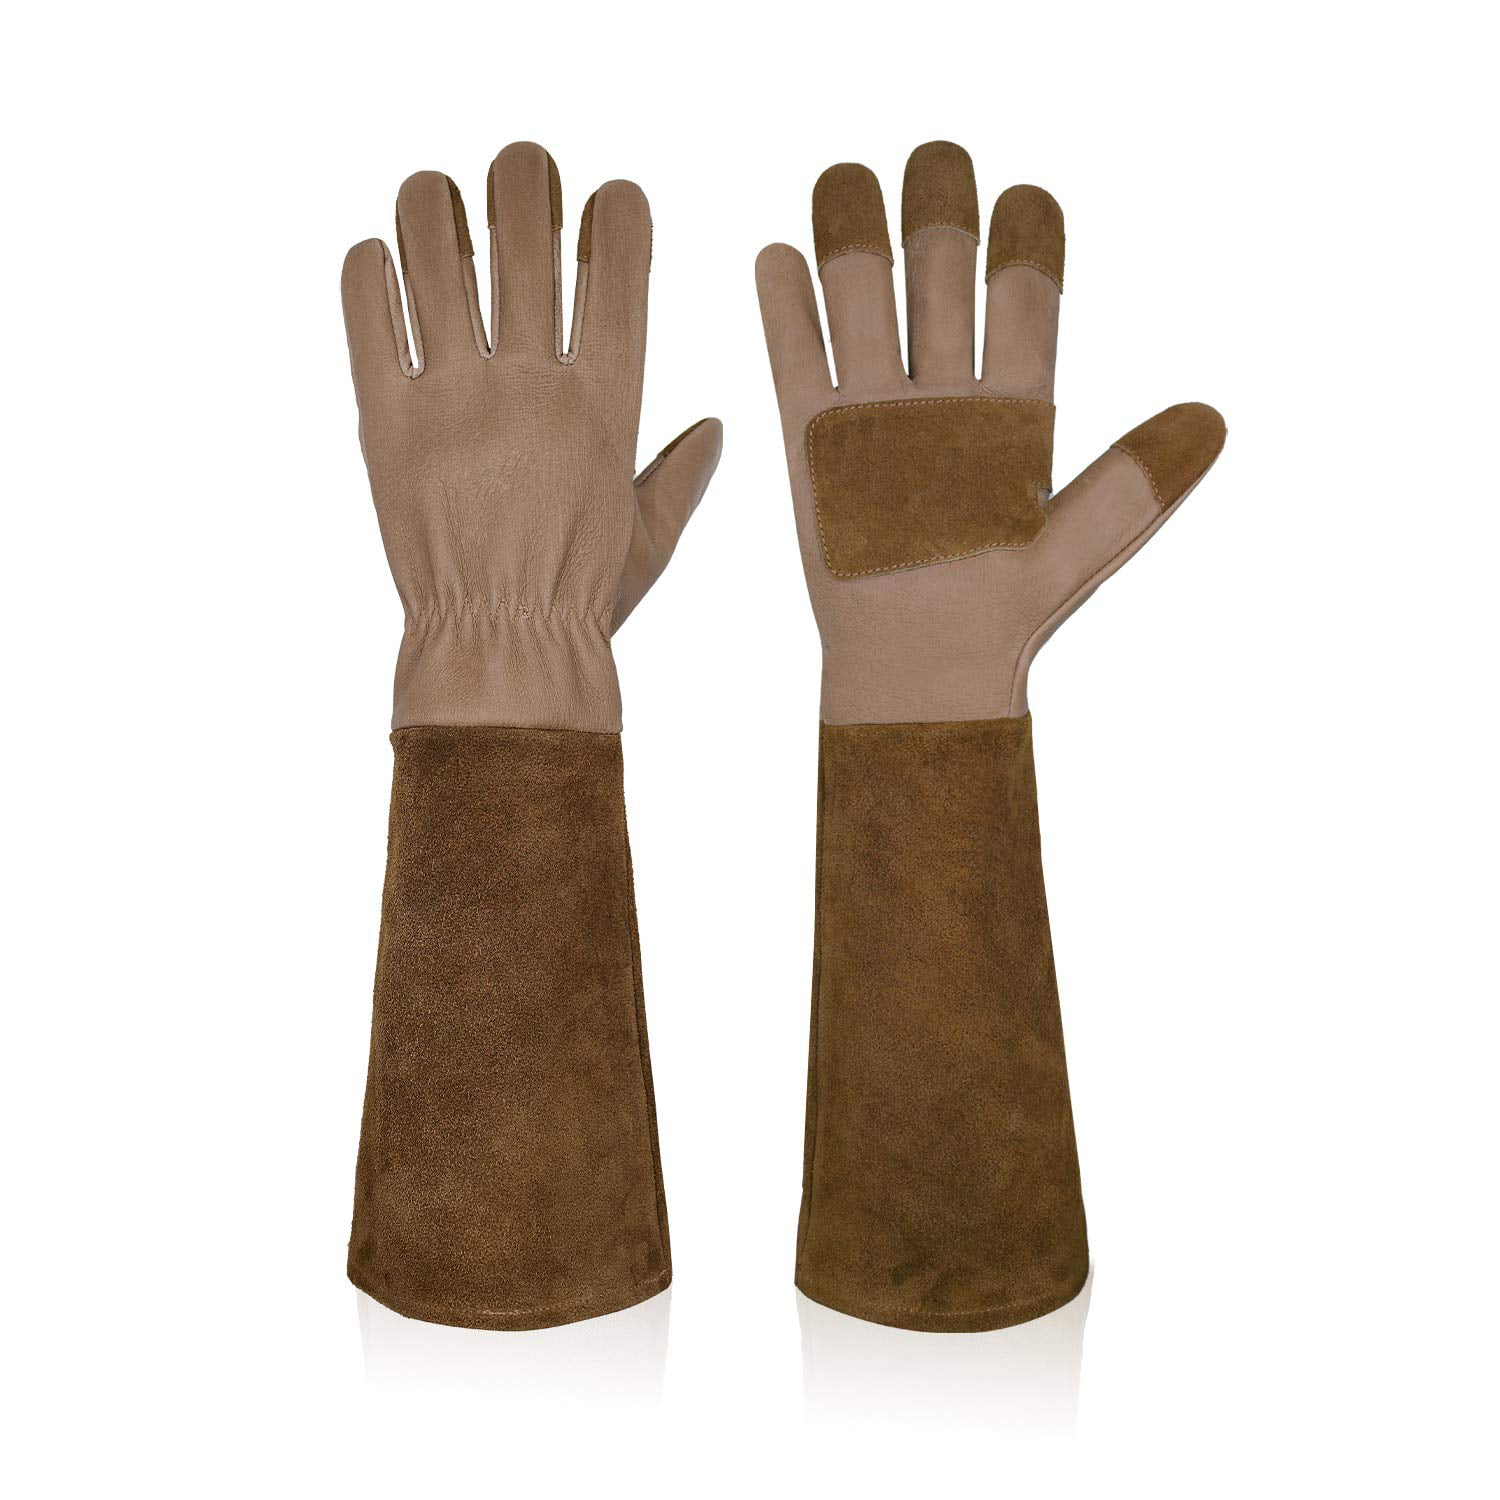 Goatskin Leather Rose Pruning Gardening Gloves with Long Cowhide Gauntlet M/L/XL 